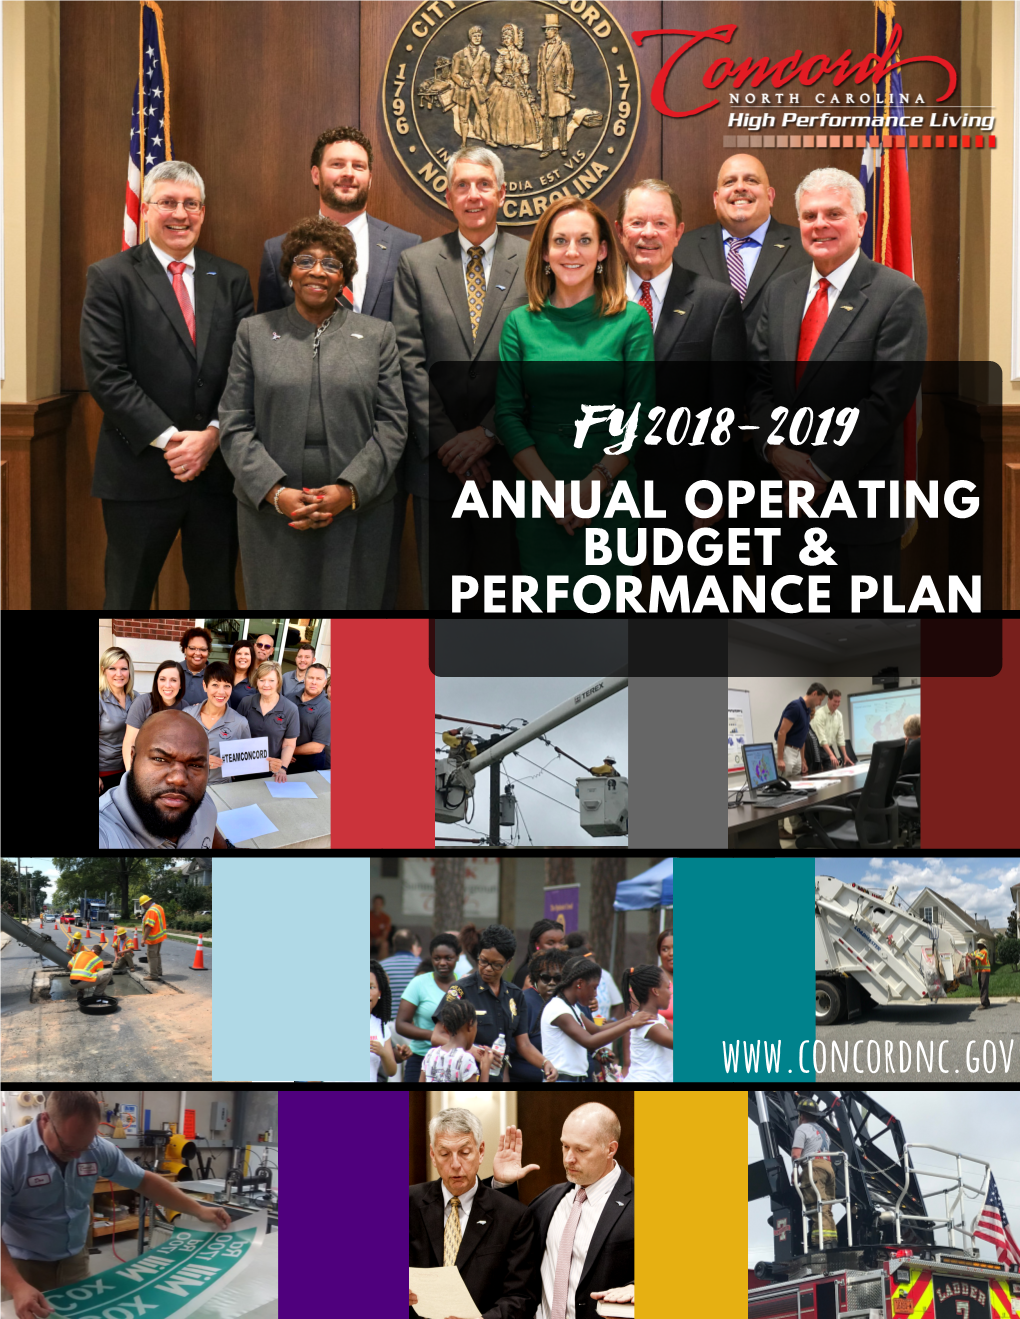 Annual Operating Budget & Performance Plan